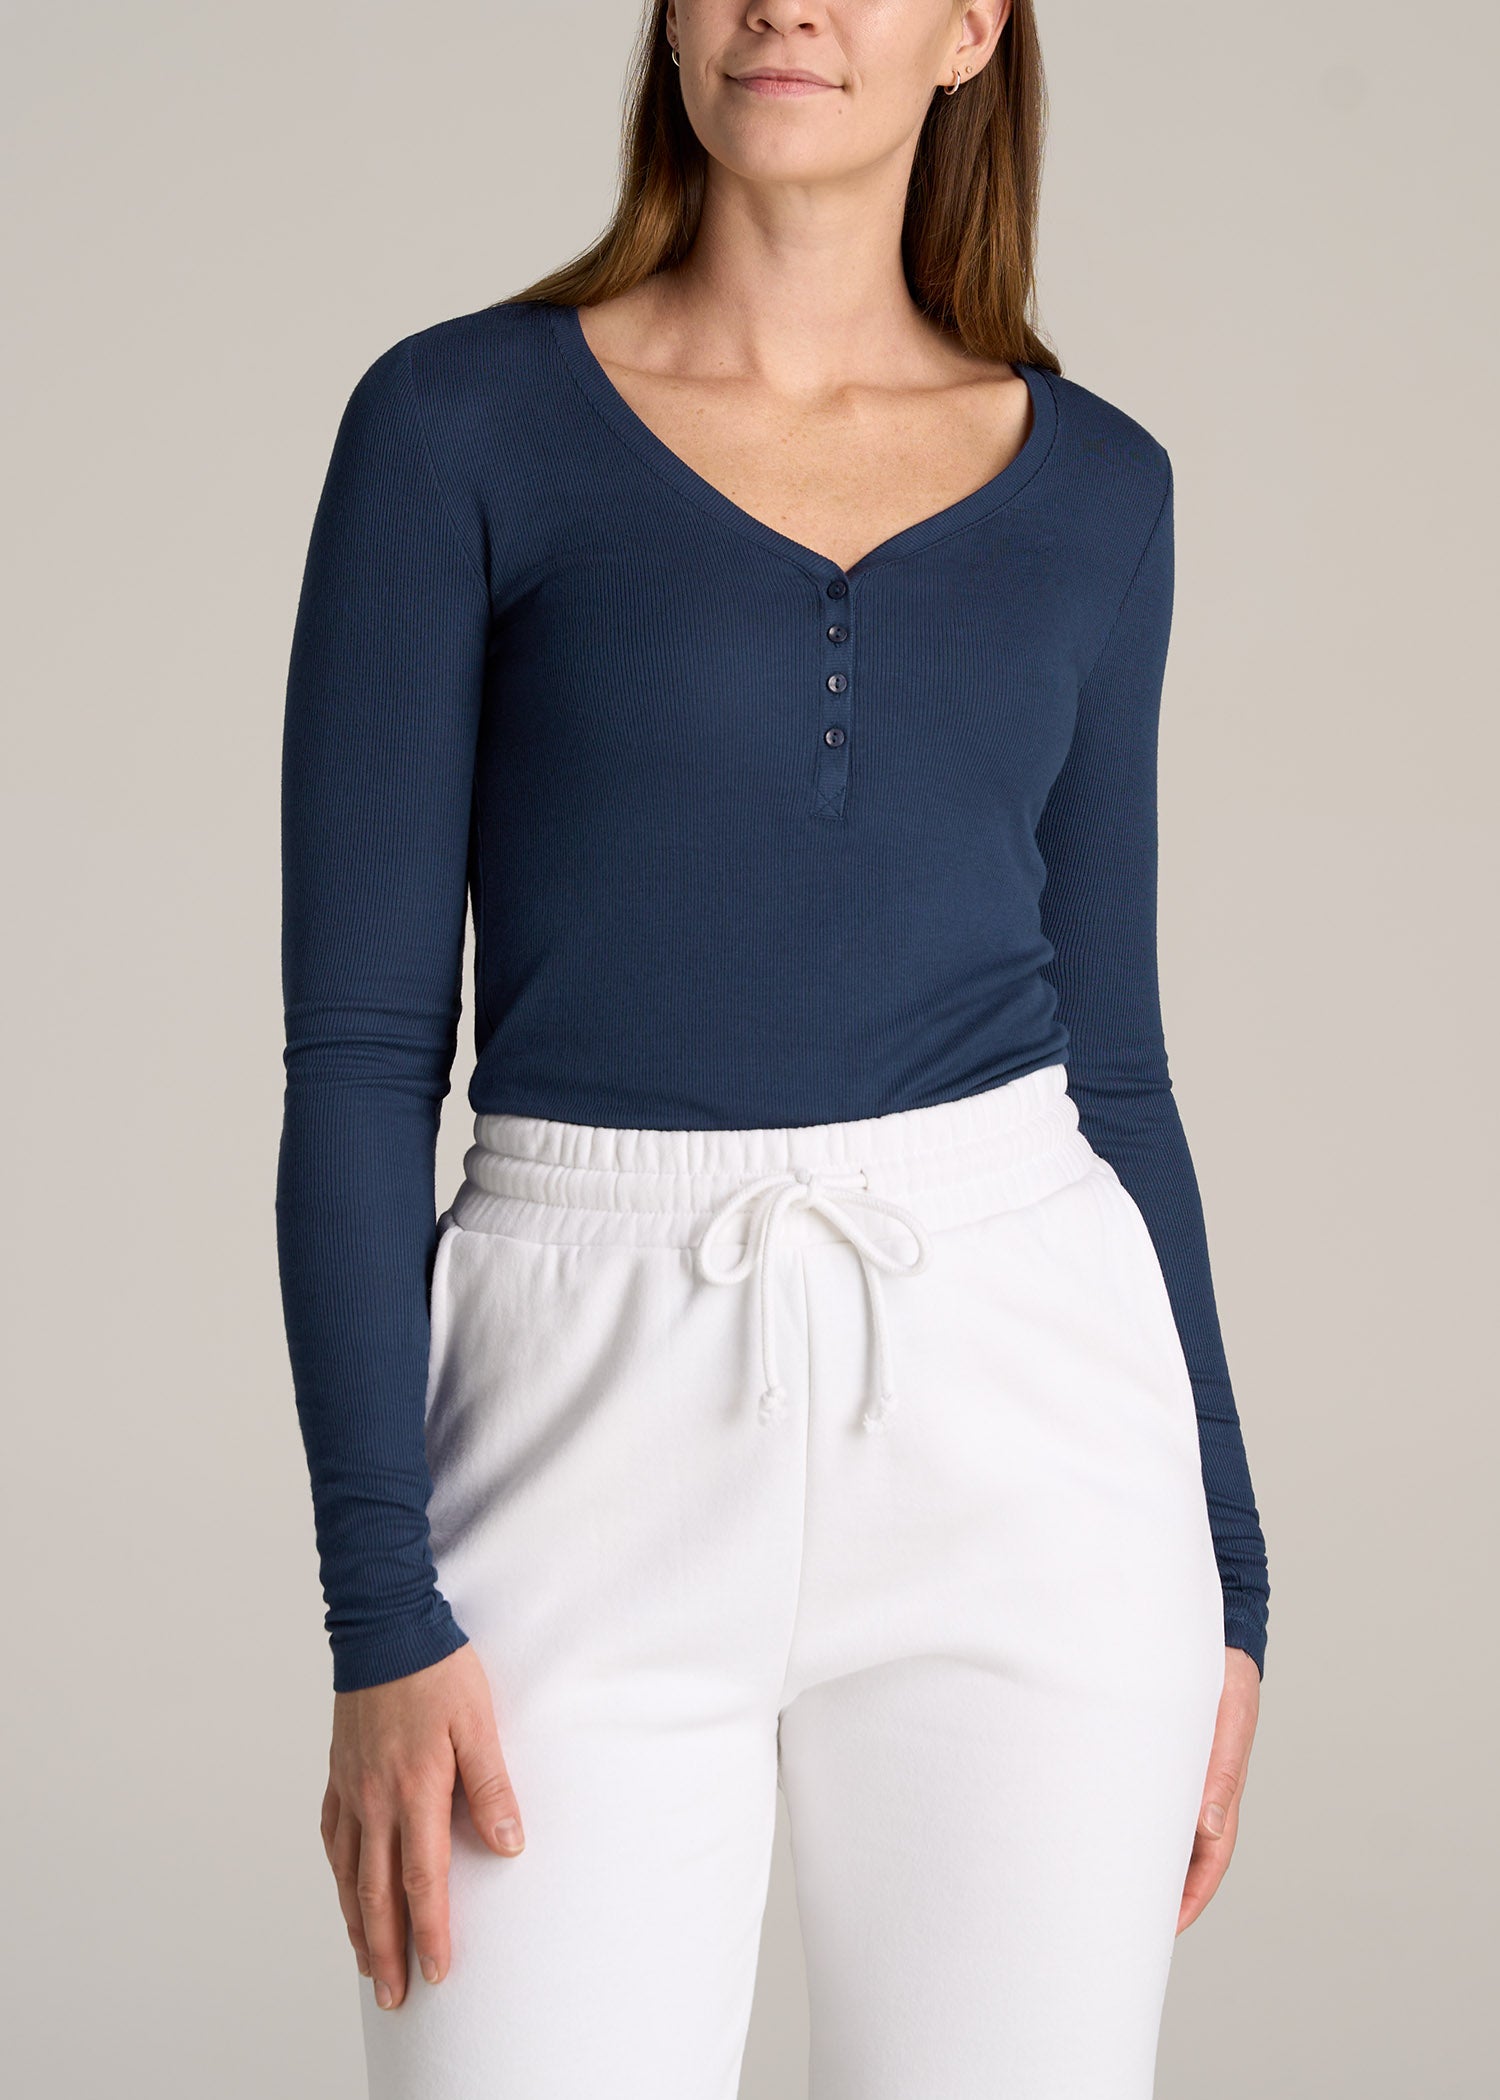 Women's Full Sleeves Henley Top - (Clearance No Exchange No Refund